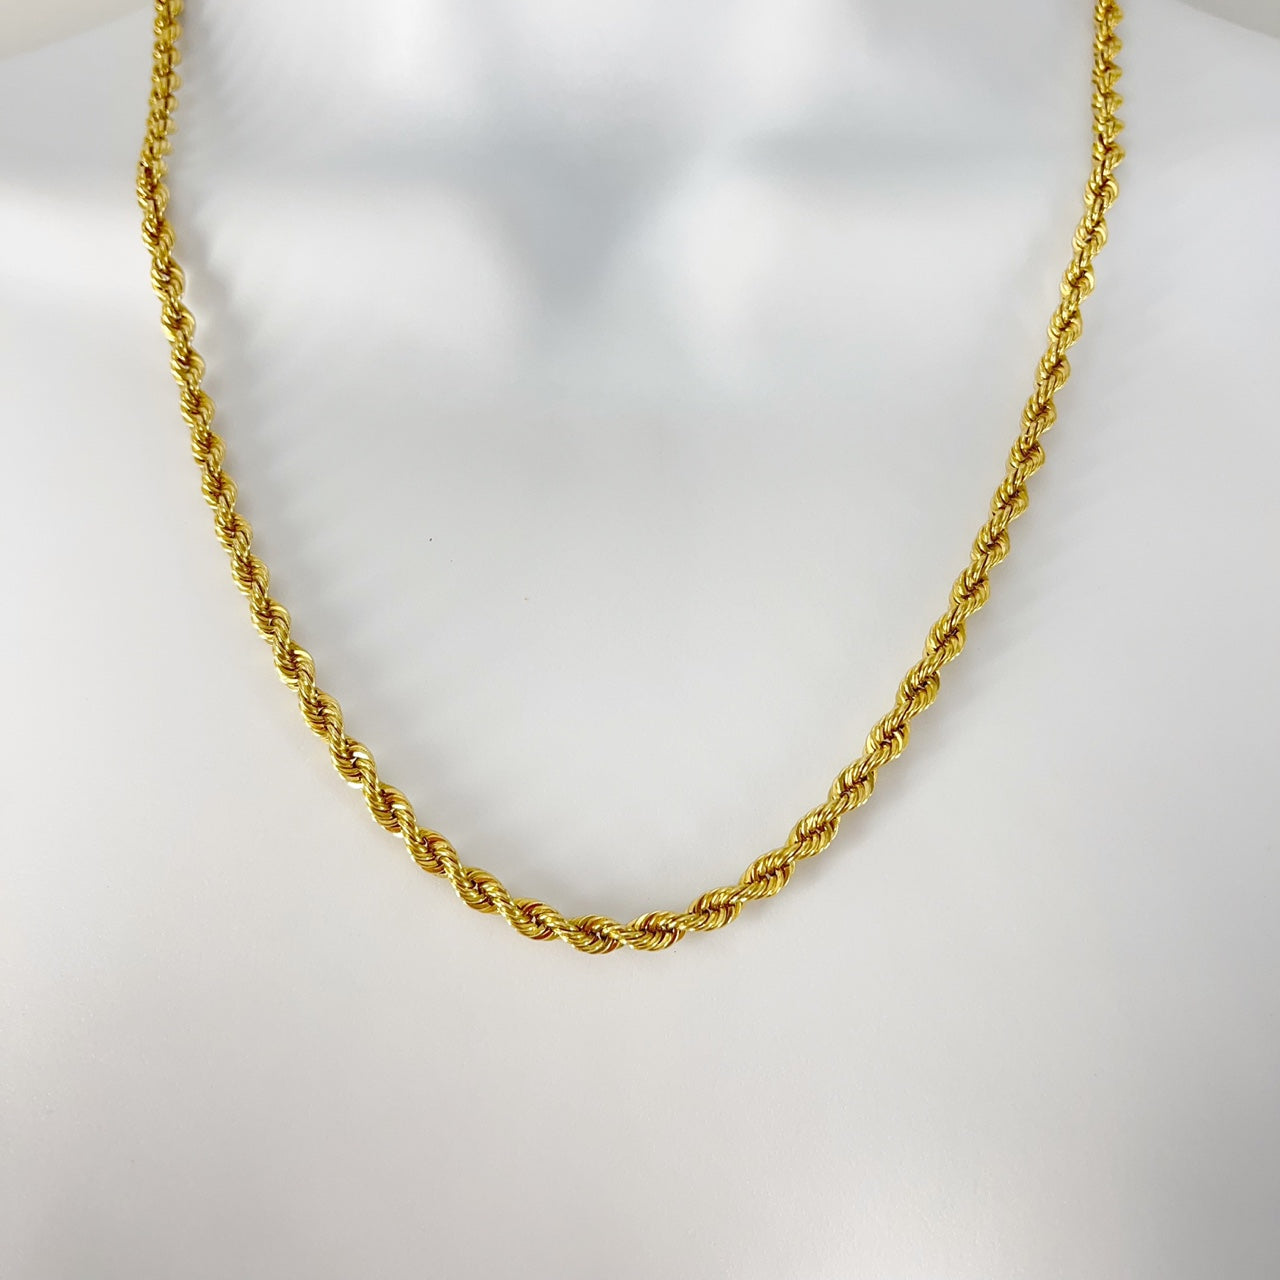 14k Solid yellow Gold Rope Chain Necklace 22"[14K Solid Gold]